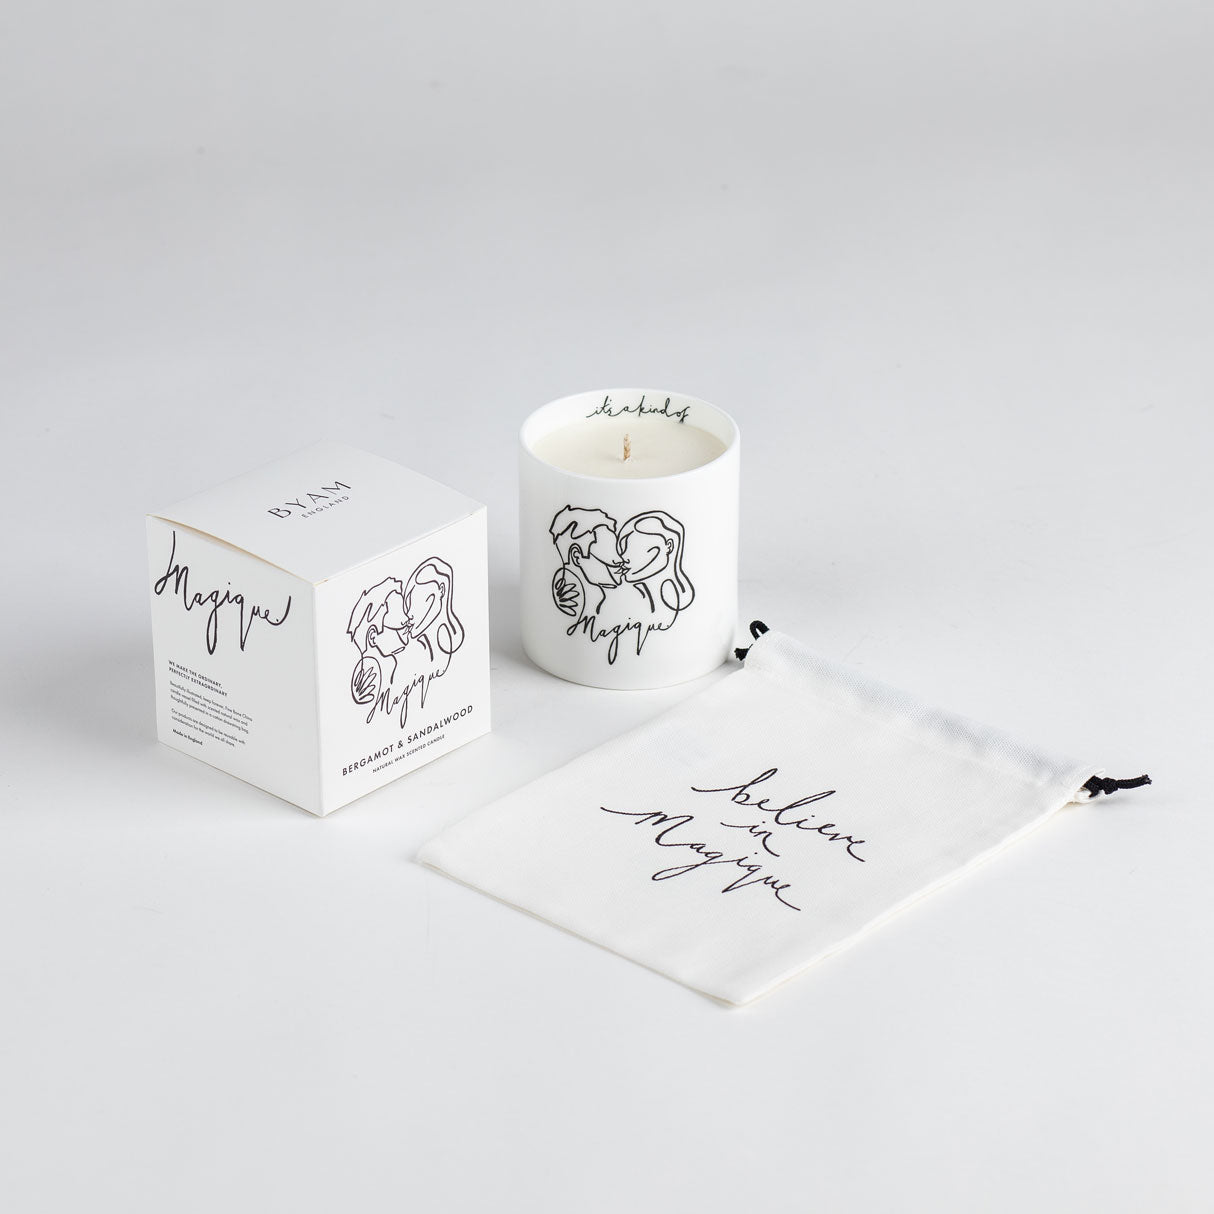 Candle + Diffuser – Gift Set - BYAM England